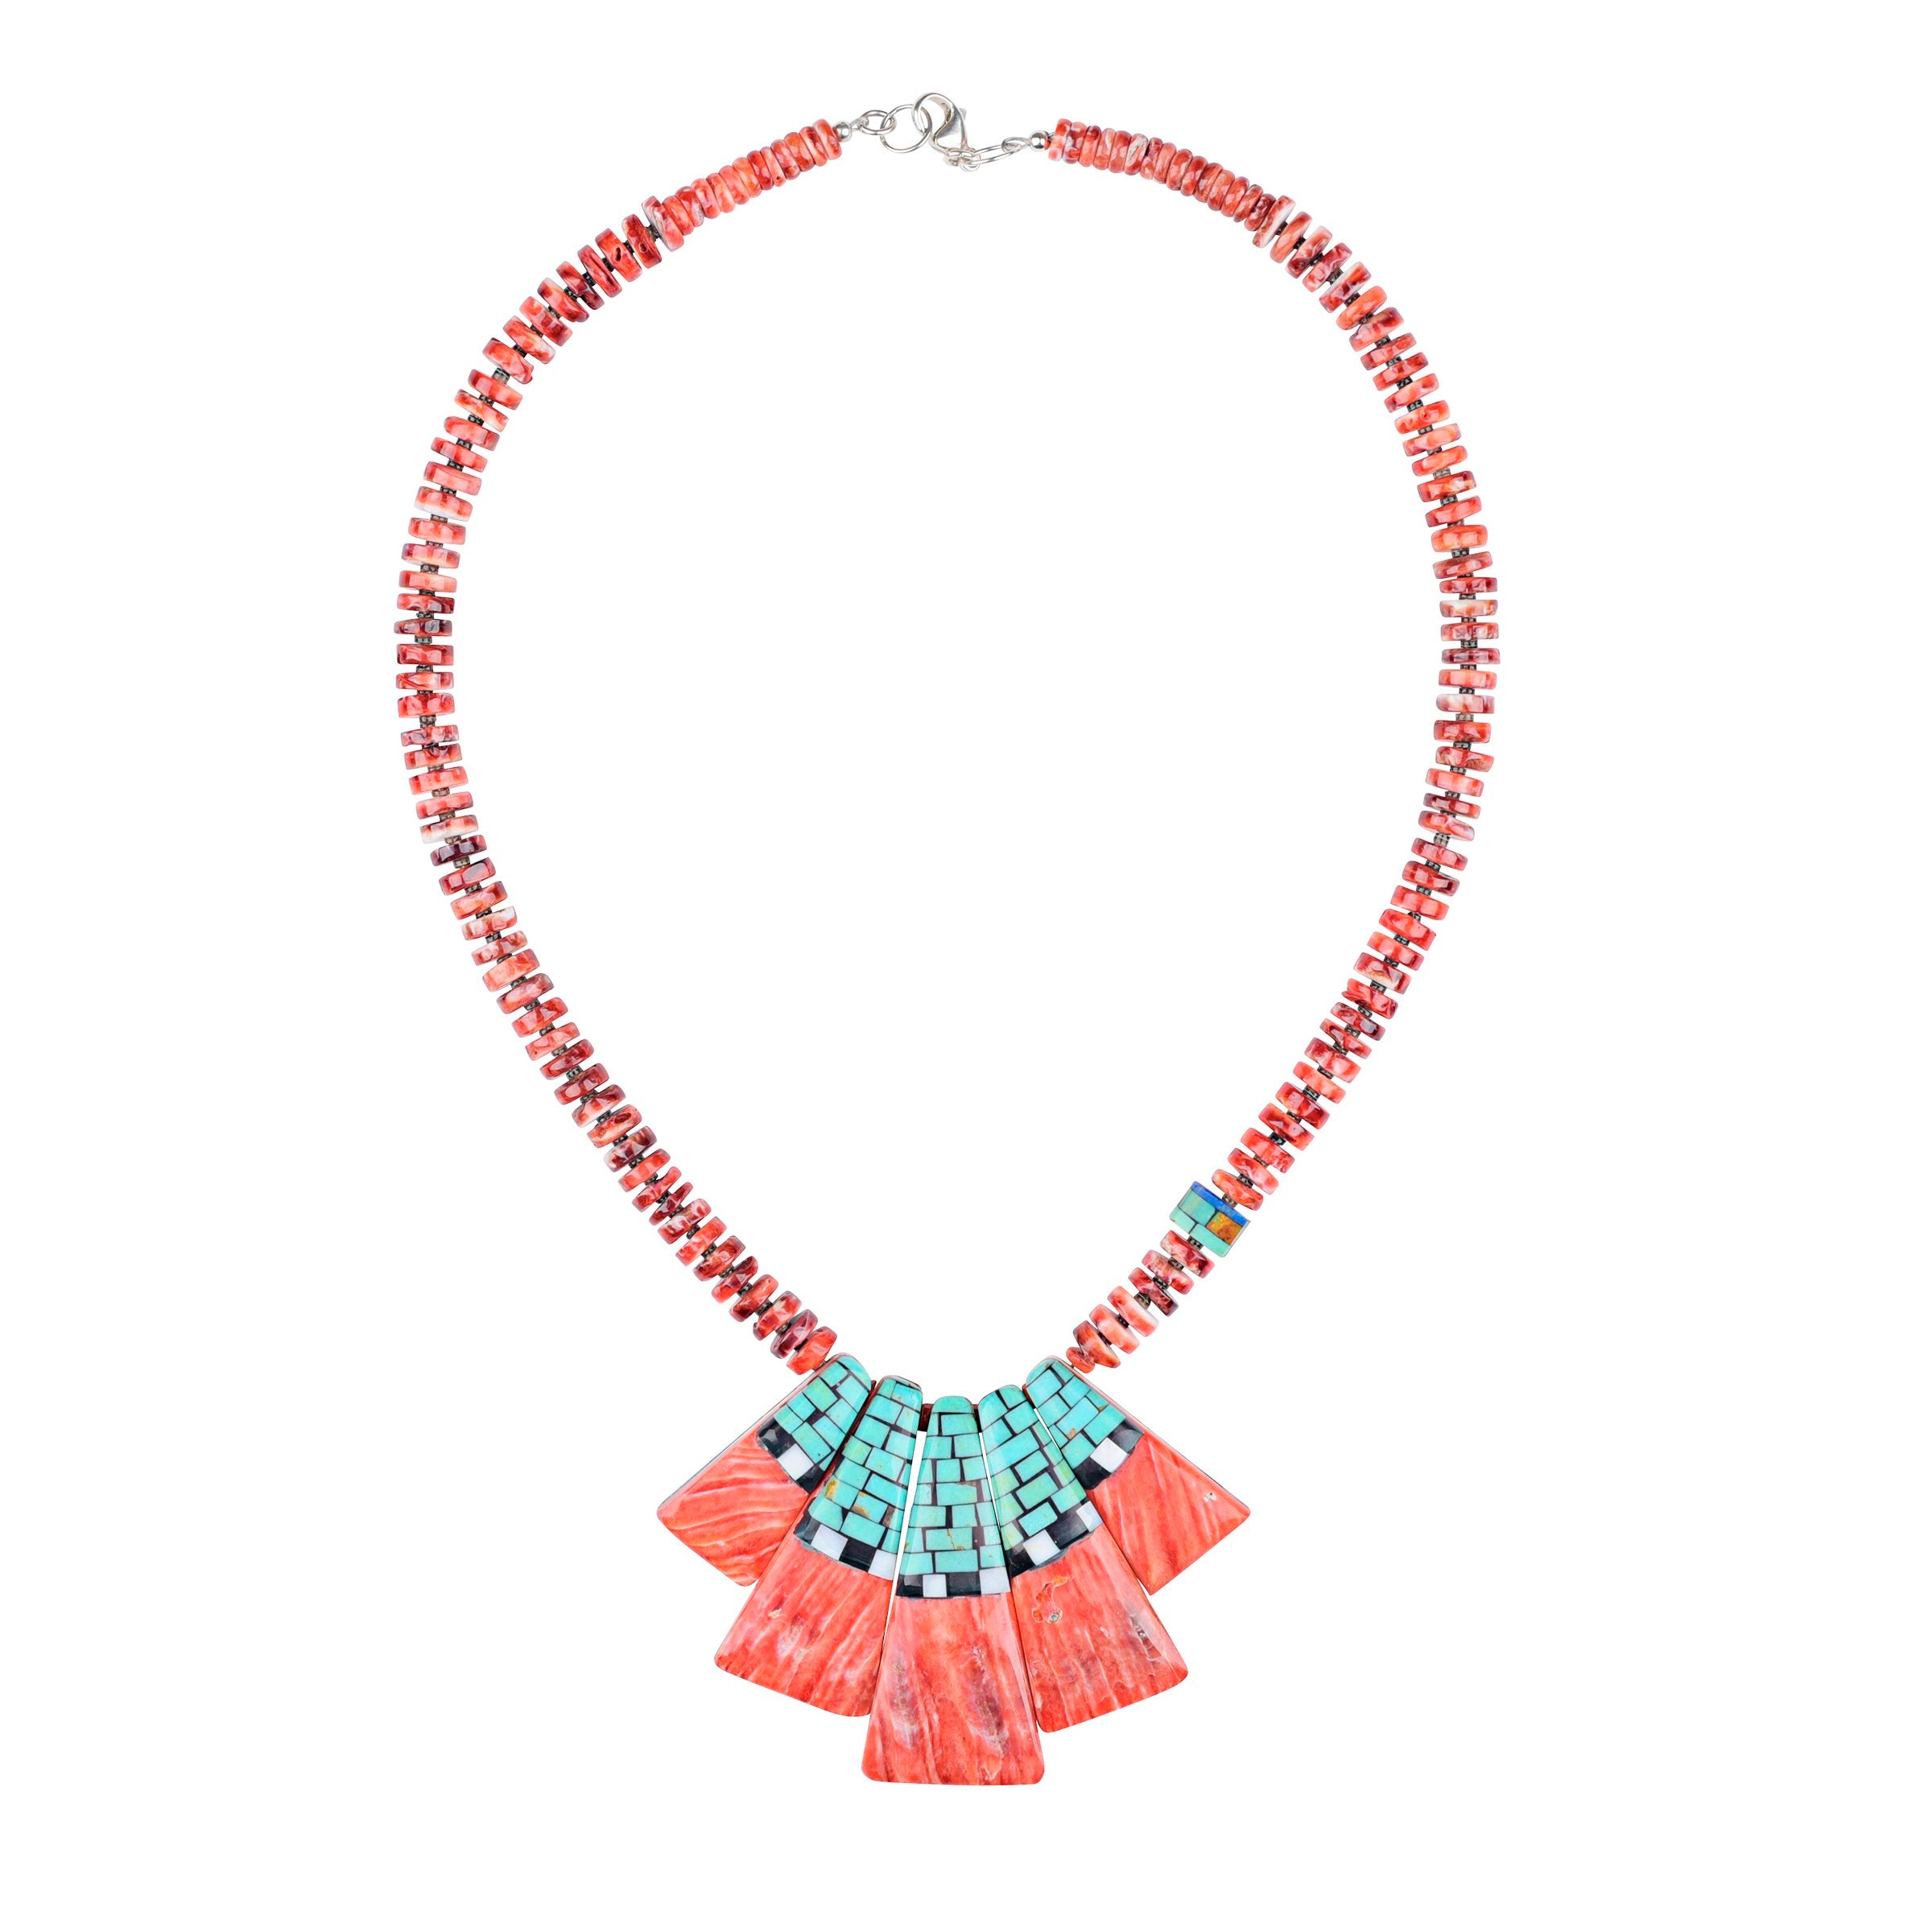 Charlene Reano Two-Sided Necklace